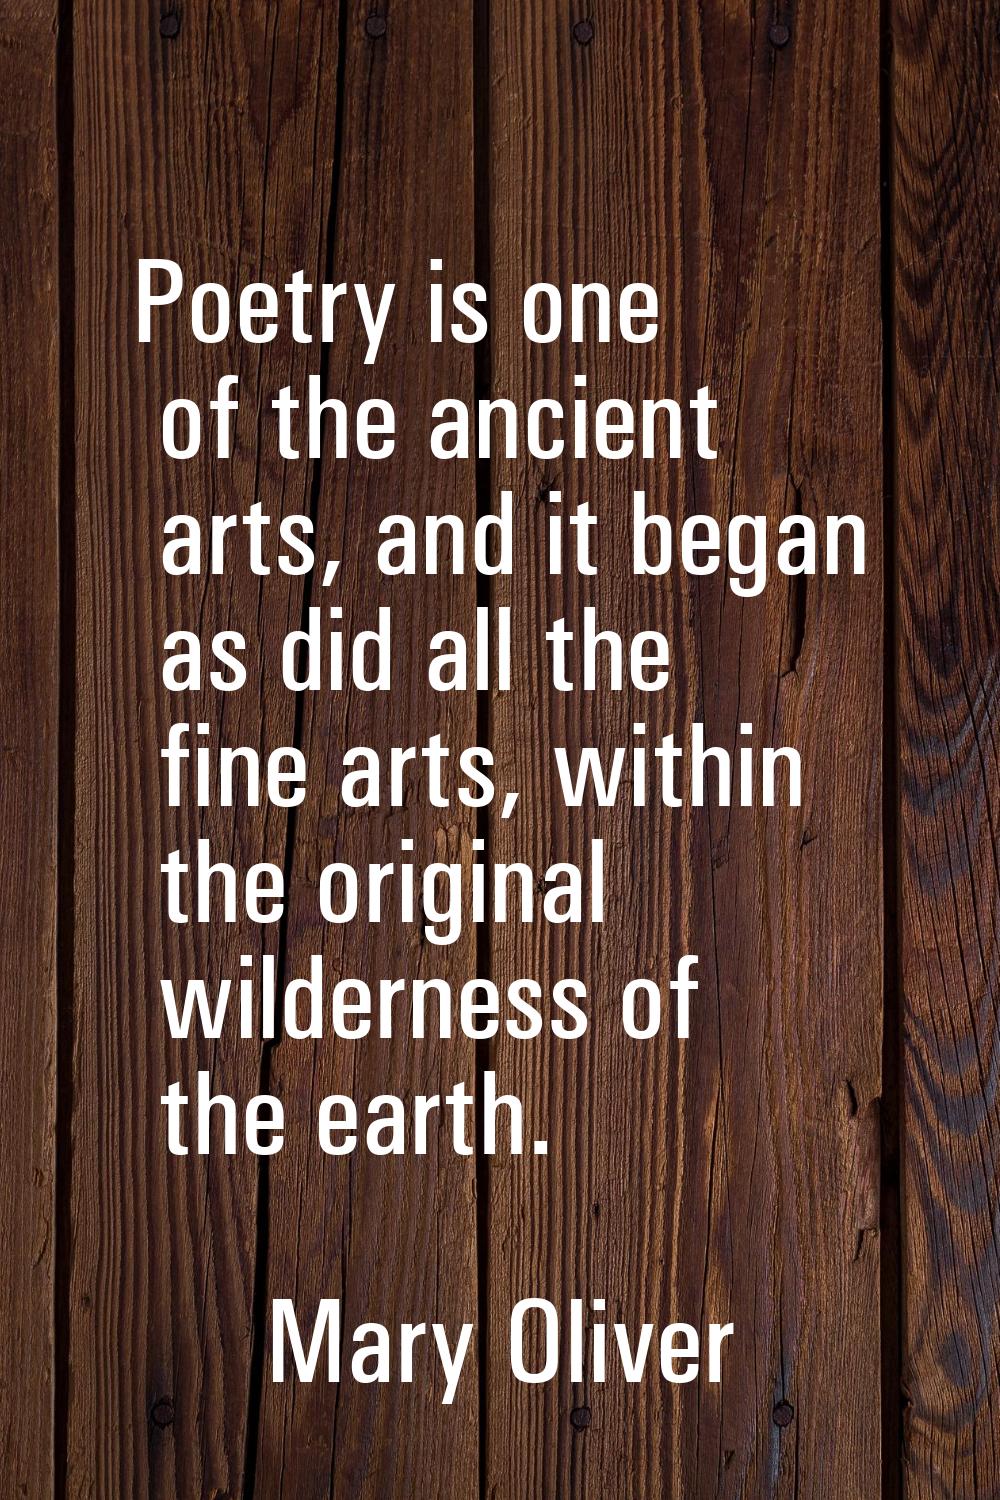 Poetry is one of the ancient arts, and it began as did all the fine arts, within the original wilde